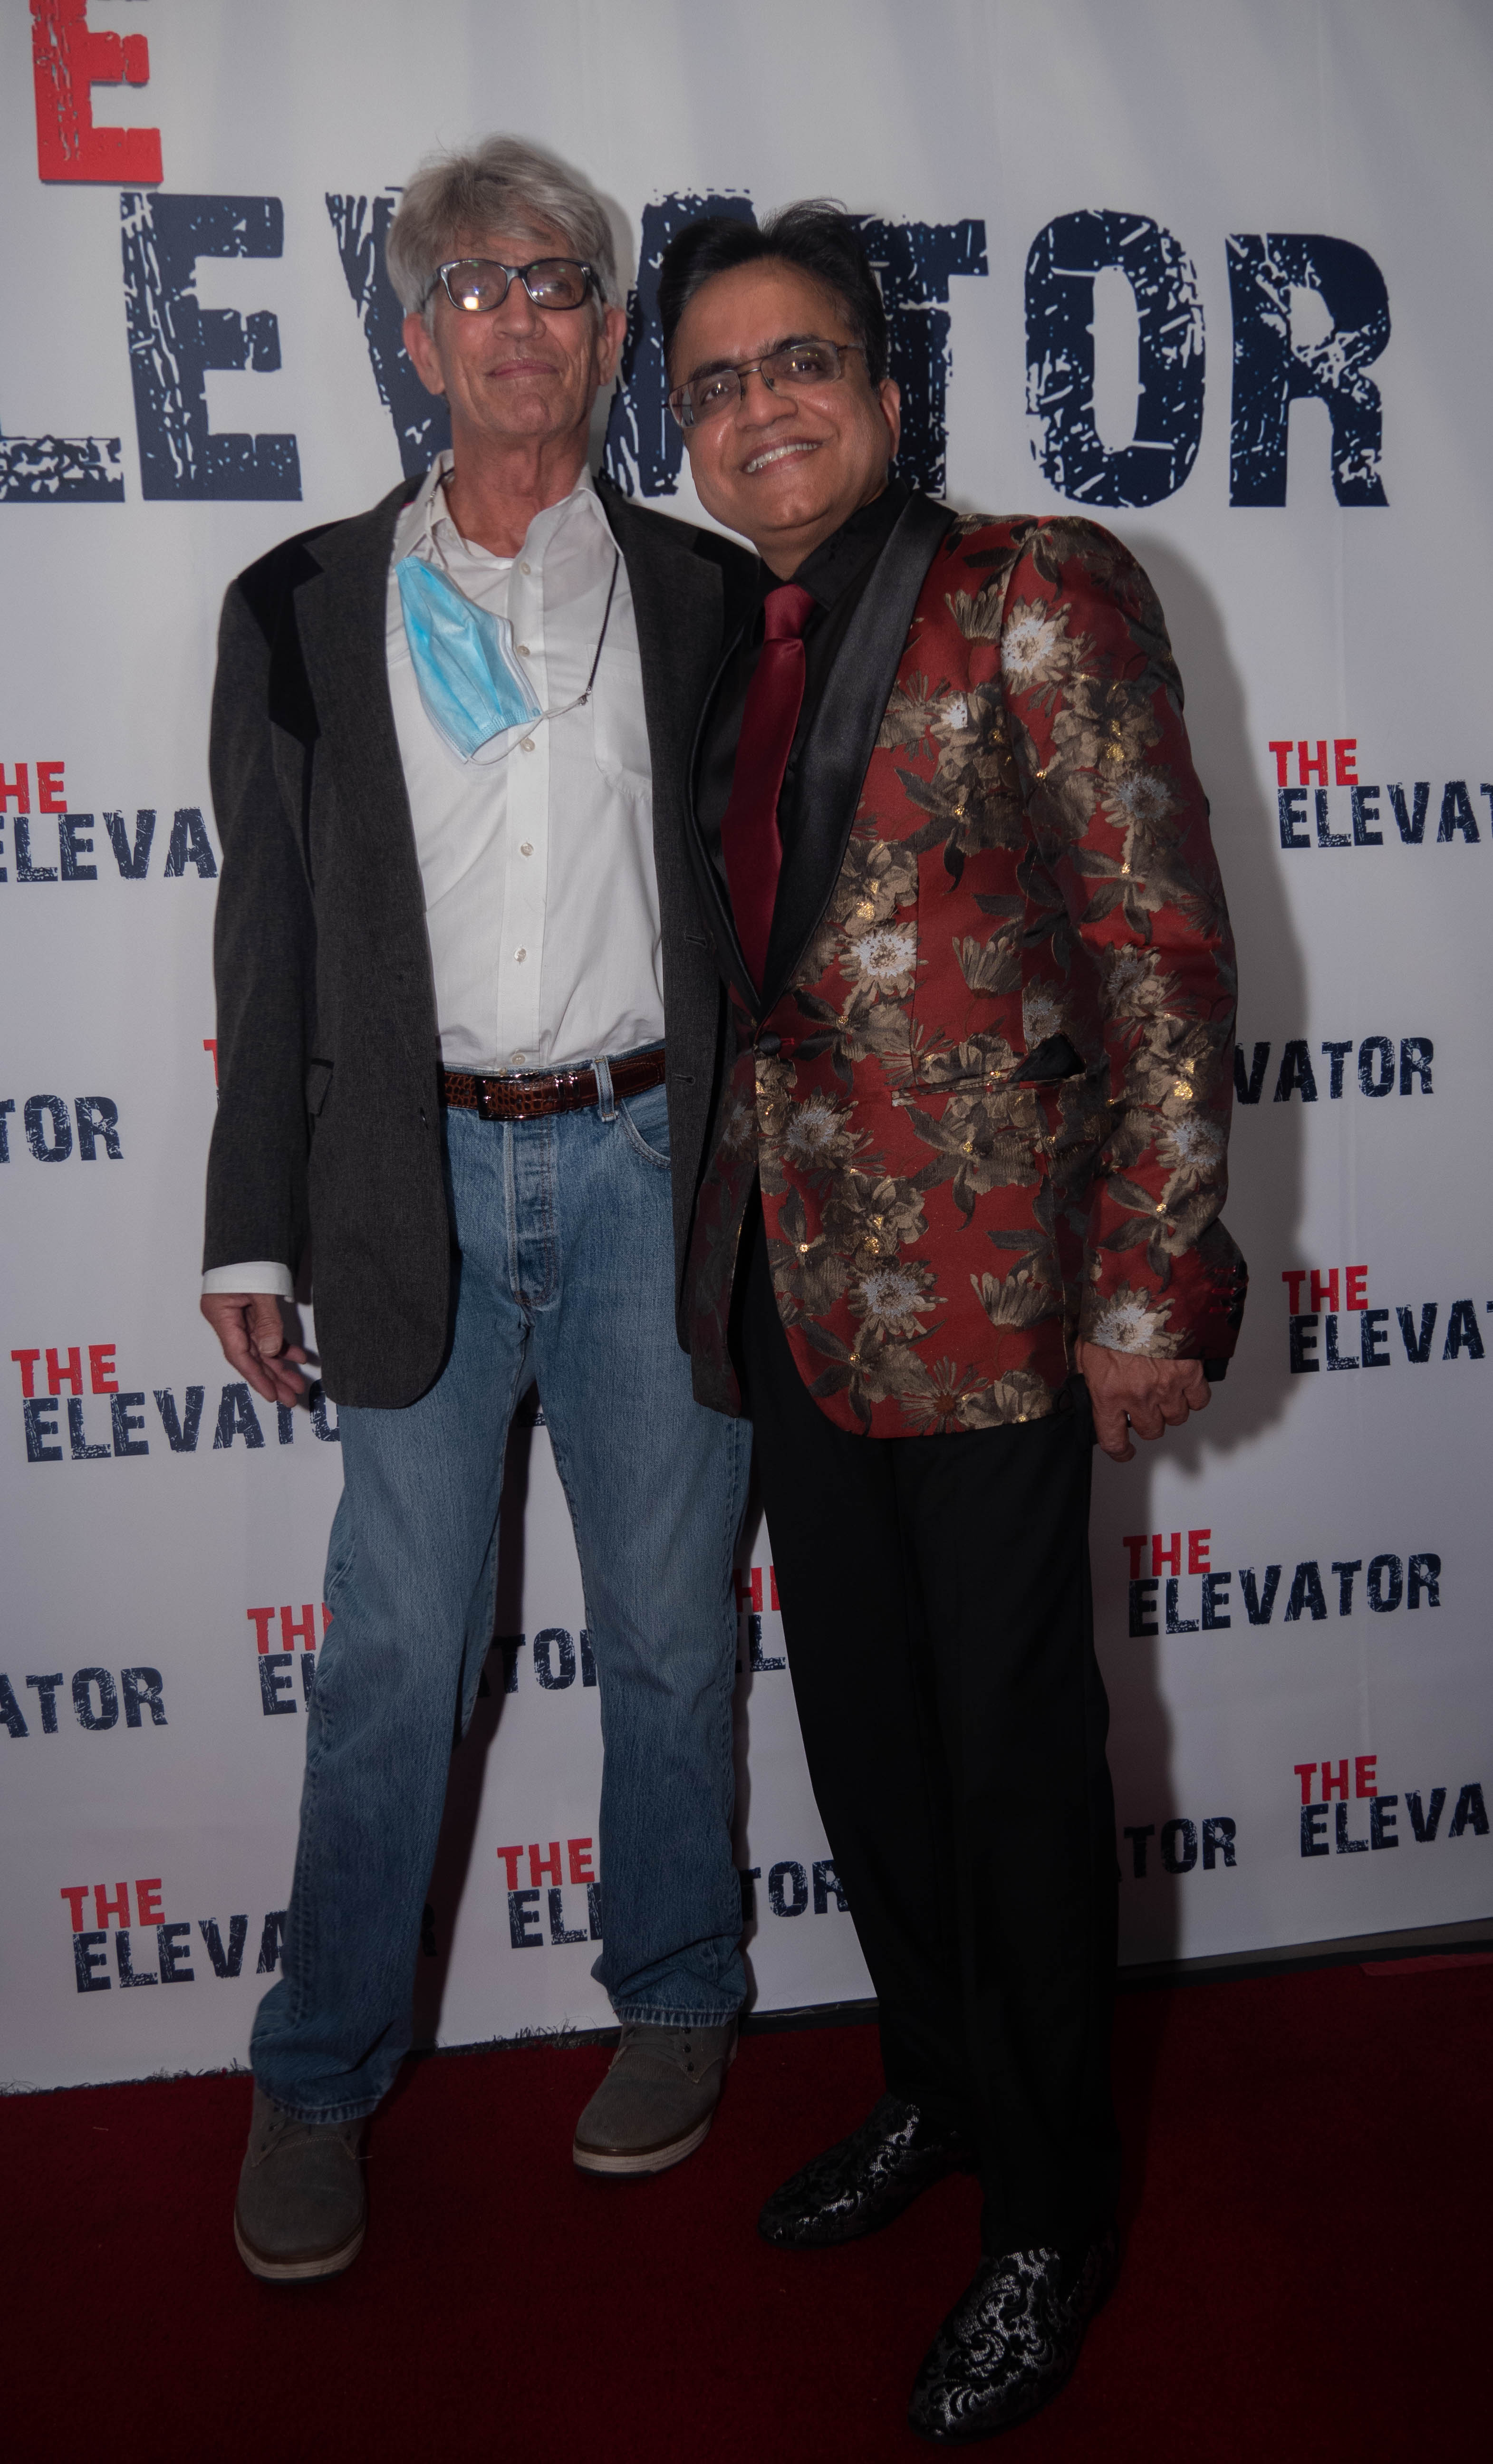 Celebrities Came out to Support Mukesh Modi’s "The Elevator" Film Premiere at the TCL Chinese Theatres Starring Eric Roberts & Eugenia Kuzmina